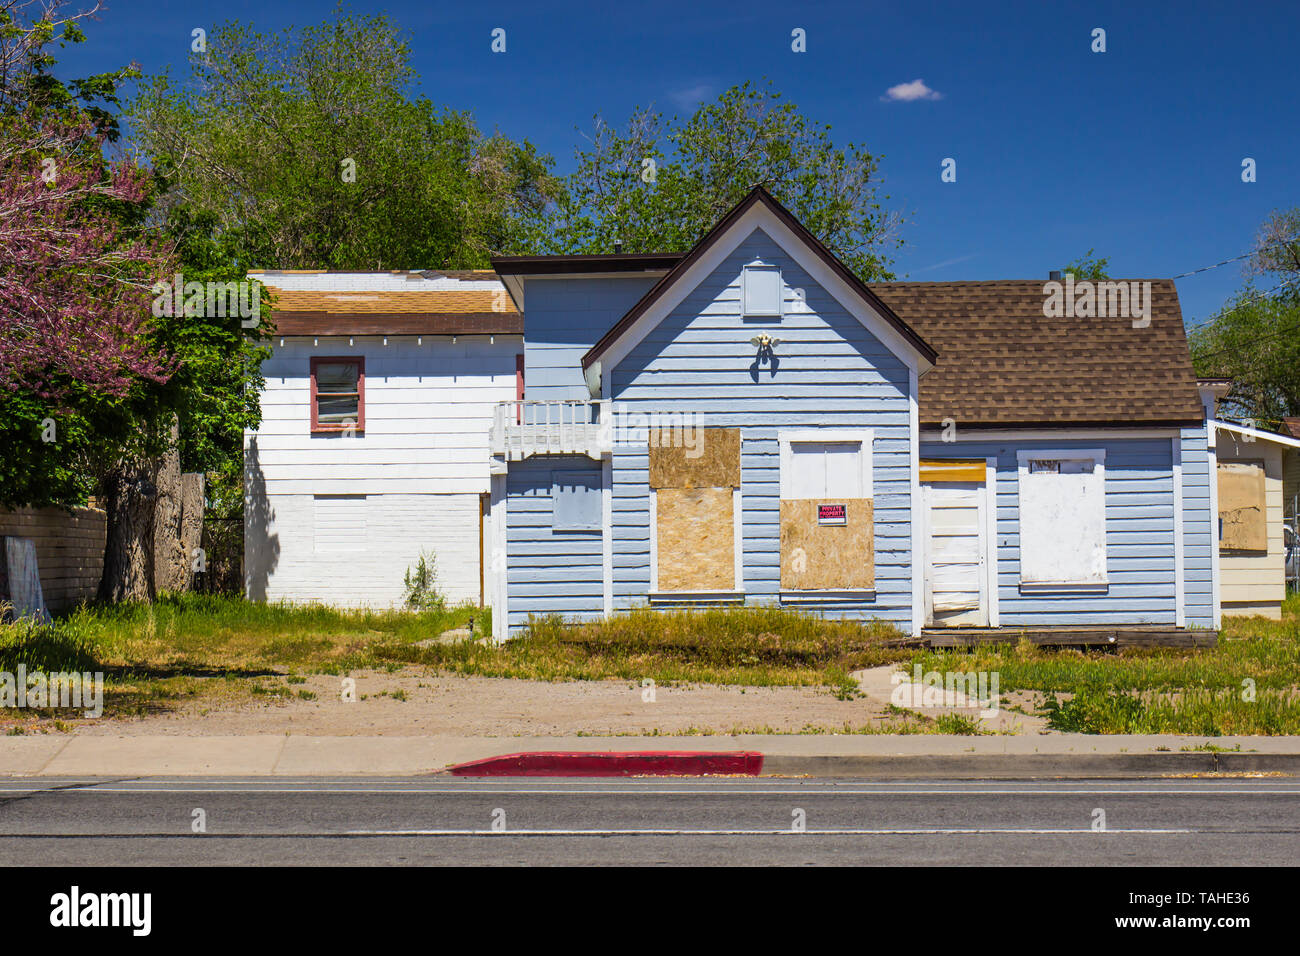 Abandoned Boarded Up Home Lost In Foreclosure Stock Photo